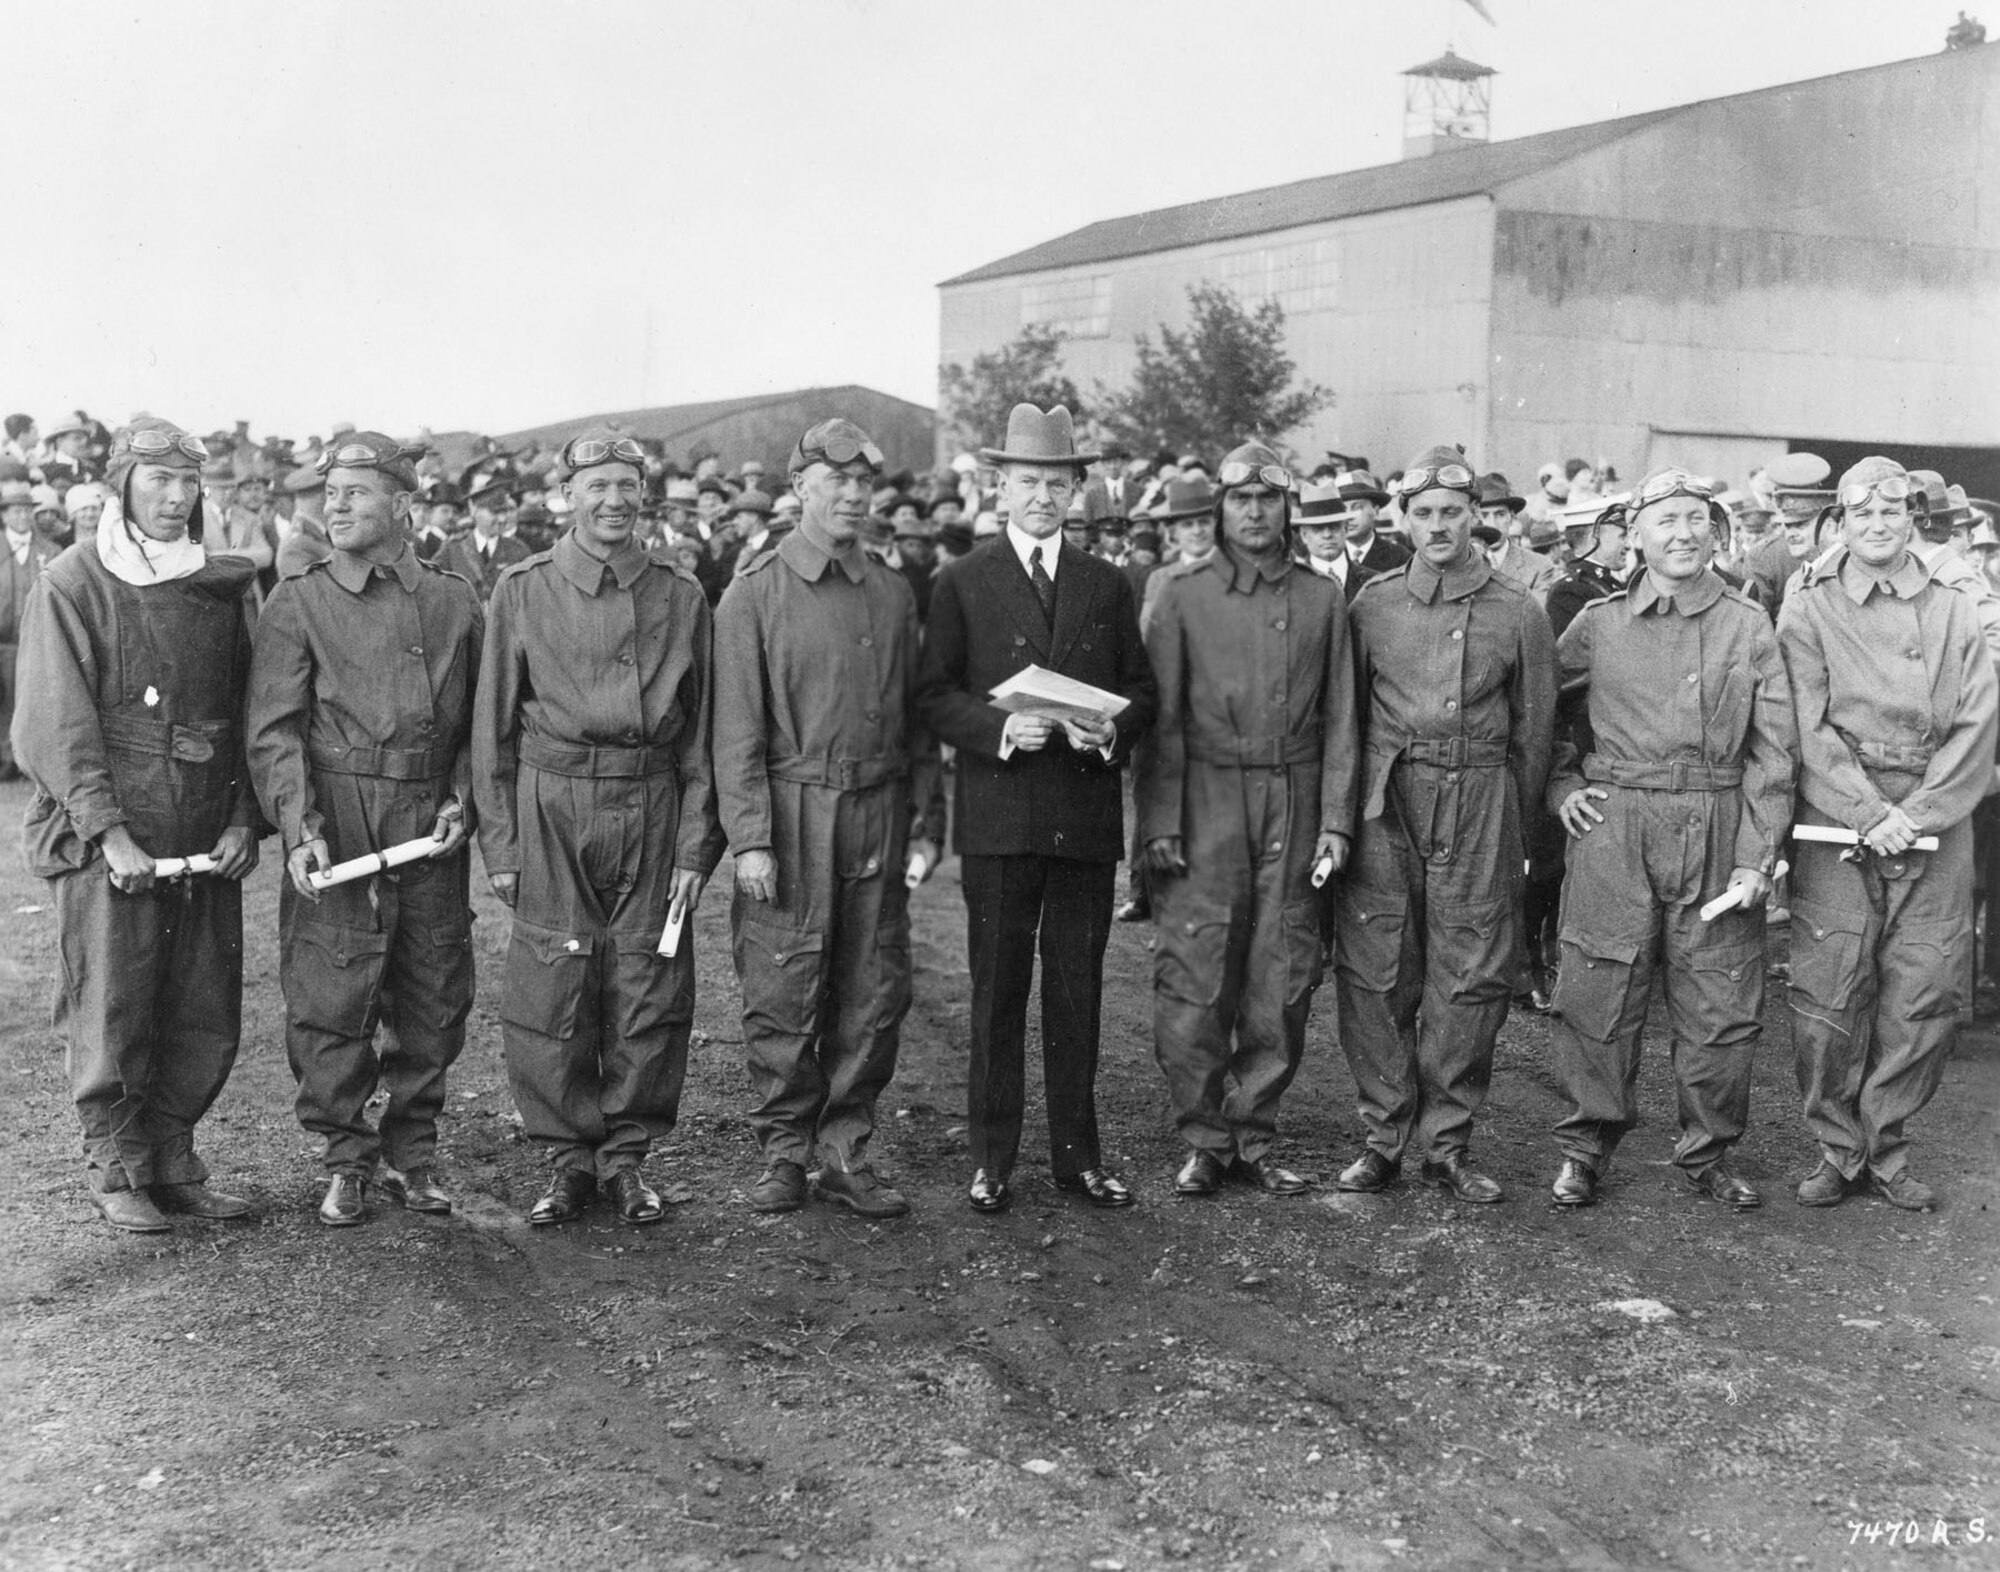 President Calvin Coolidge presents Distinguished Flying Cross citations to the Pan American Fliers on May 2, 1927. The first to circumnavigate South America by air, they were (left to right): 1st Lt. Charles Robinson, Capt. Arthur McDaniel, 1st Lt. Ennis Whitehead, Maj. Herbert Dargue, President Coolidge, Capt. Ira Eaker, 1st Lt. Muir Fairchild, 1st Lt. Bernard Thompson and 1st Lt. Leonard Weddington. They received the actual medals at a later date. (U.S. Air Force photo)